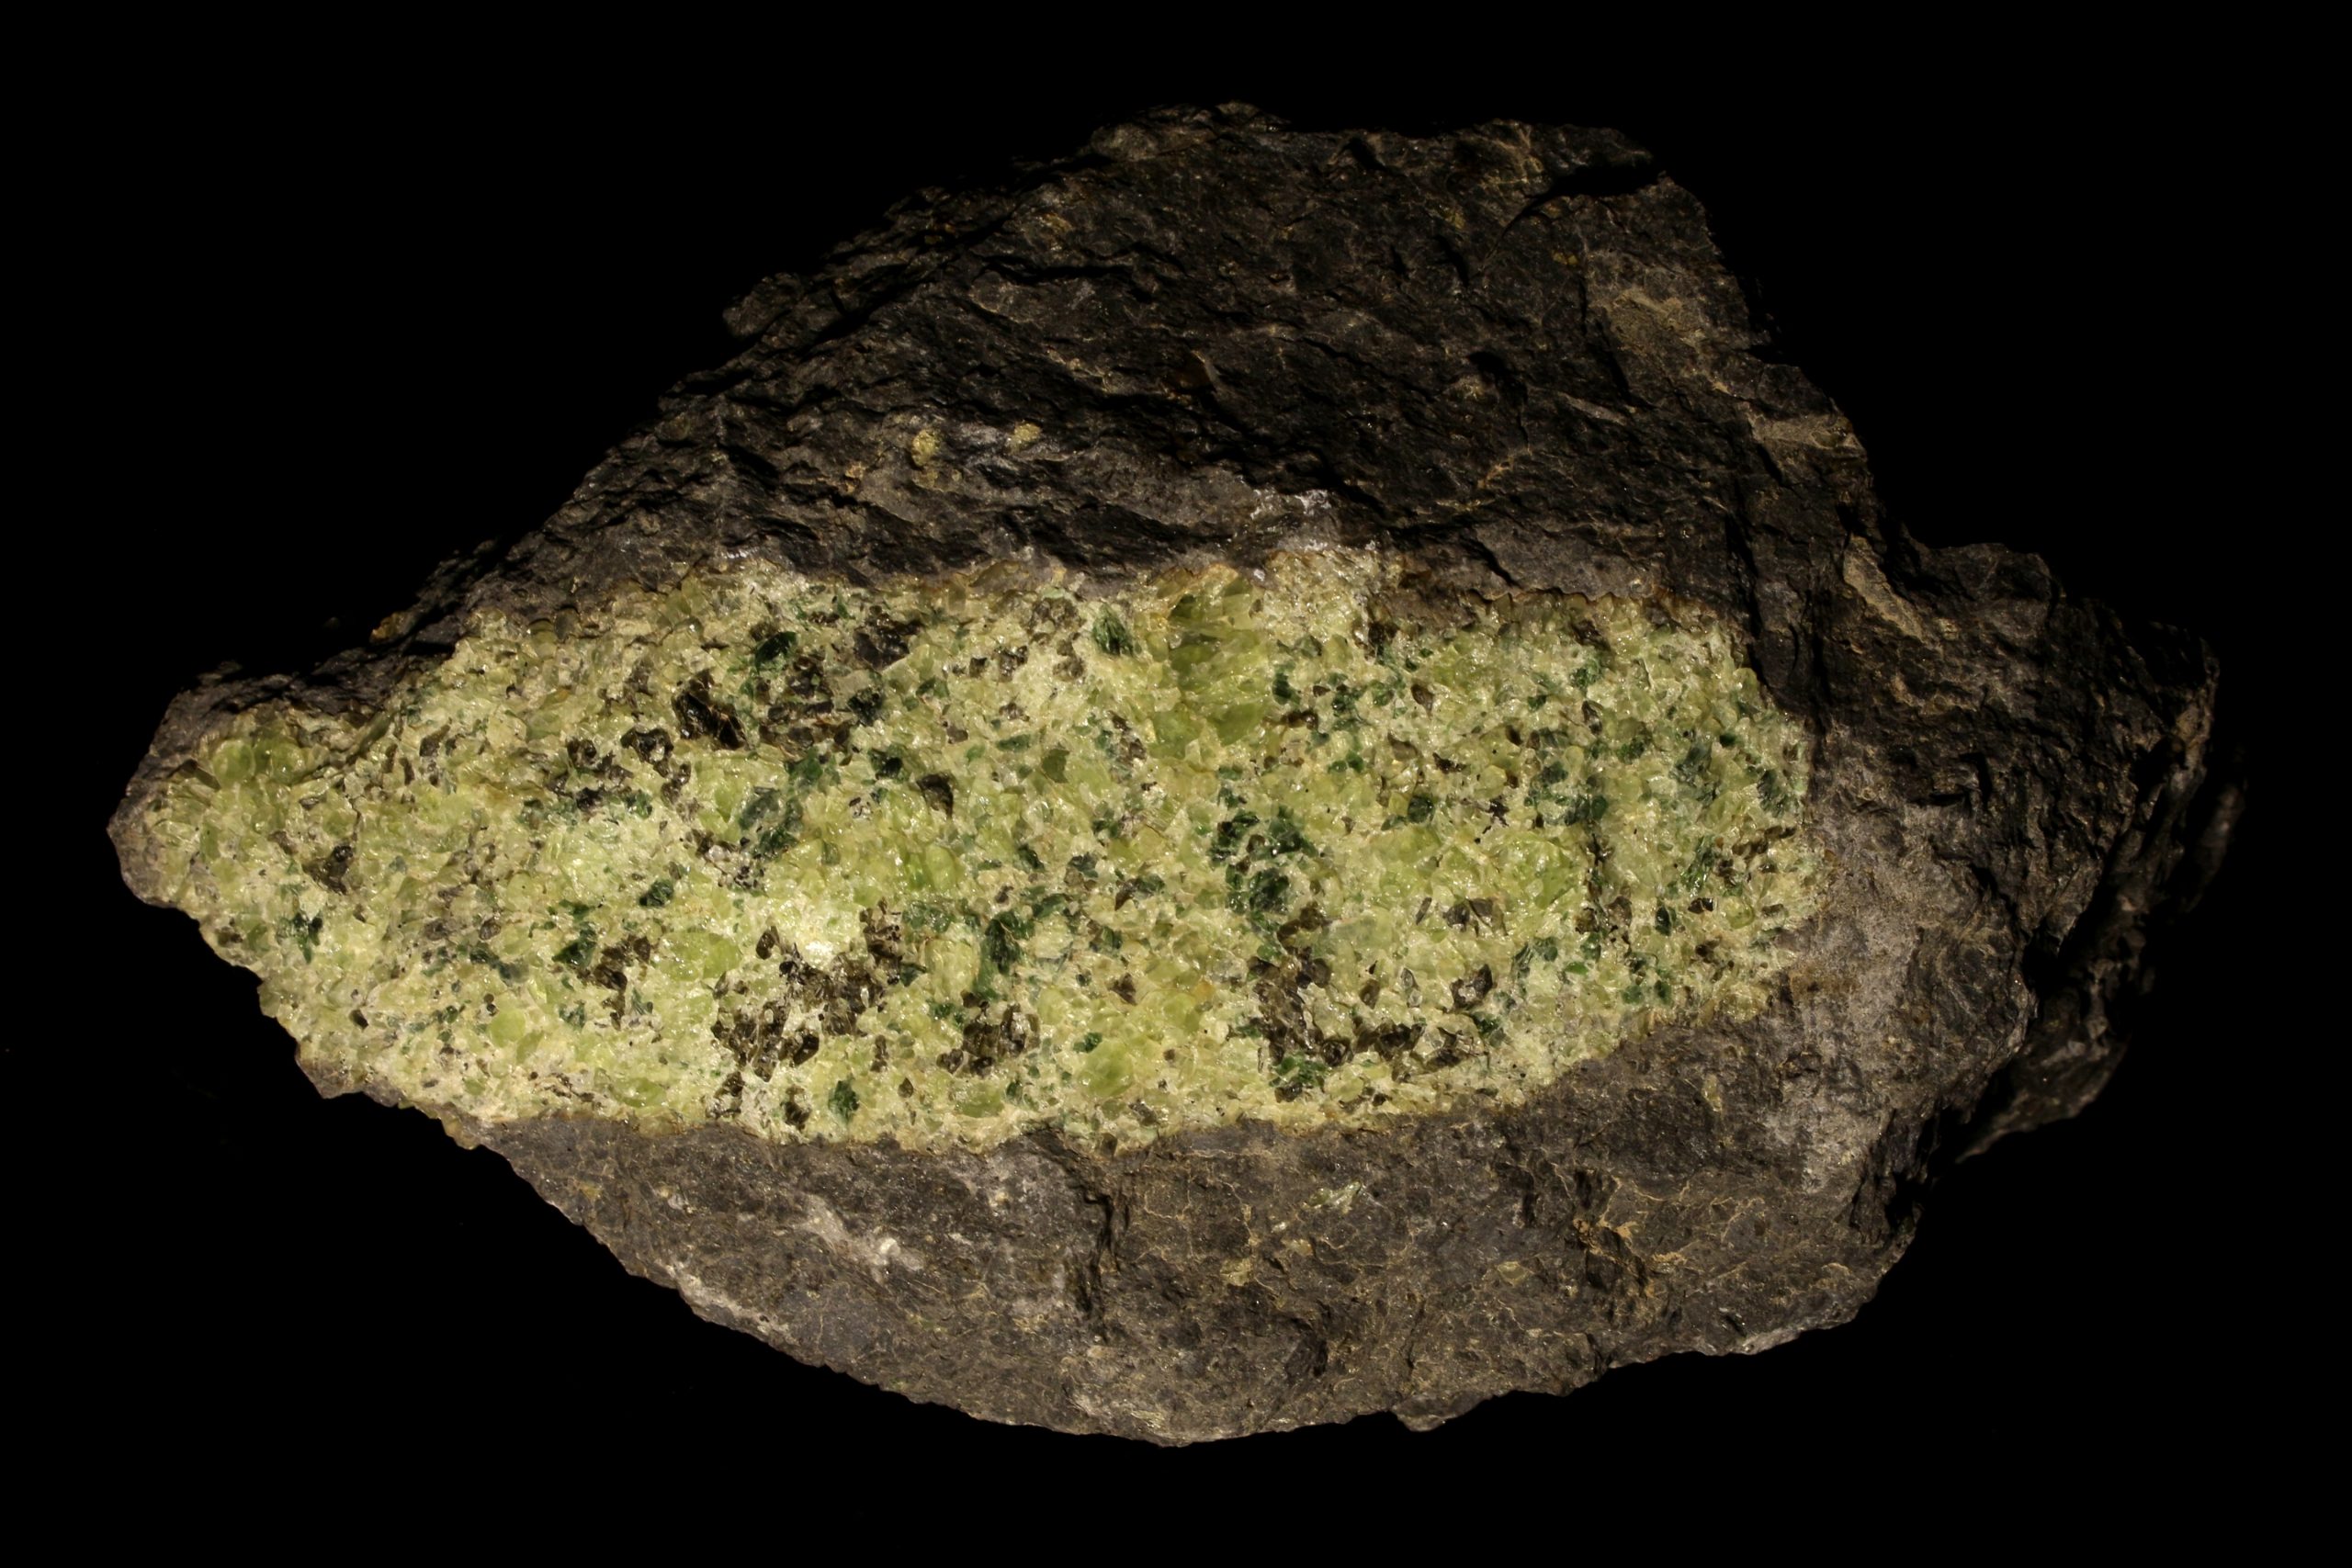 A peridotite xenolith is a rock with bright green coarse crystals that are embedded in a very smooth, fine-grained gray rock matrix.